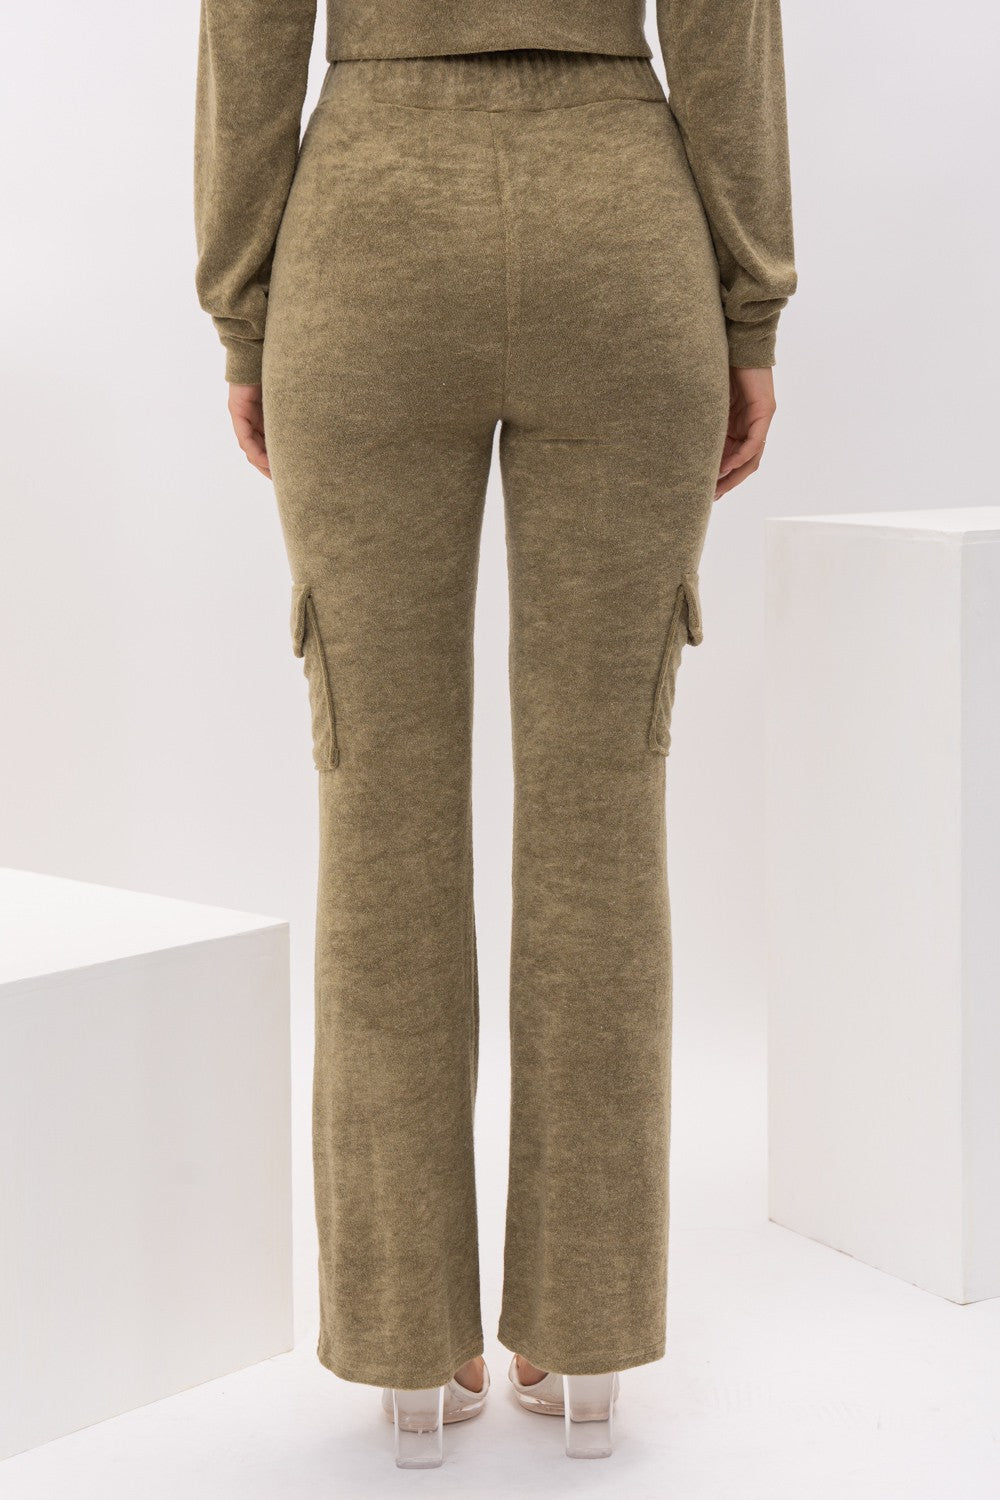 Olive Terry Cloth Cargo Pants